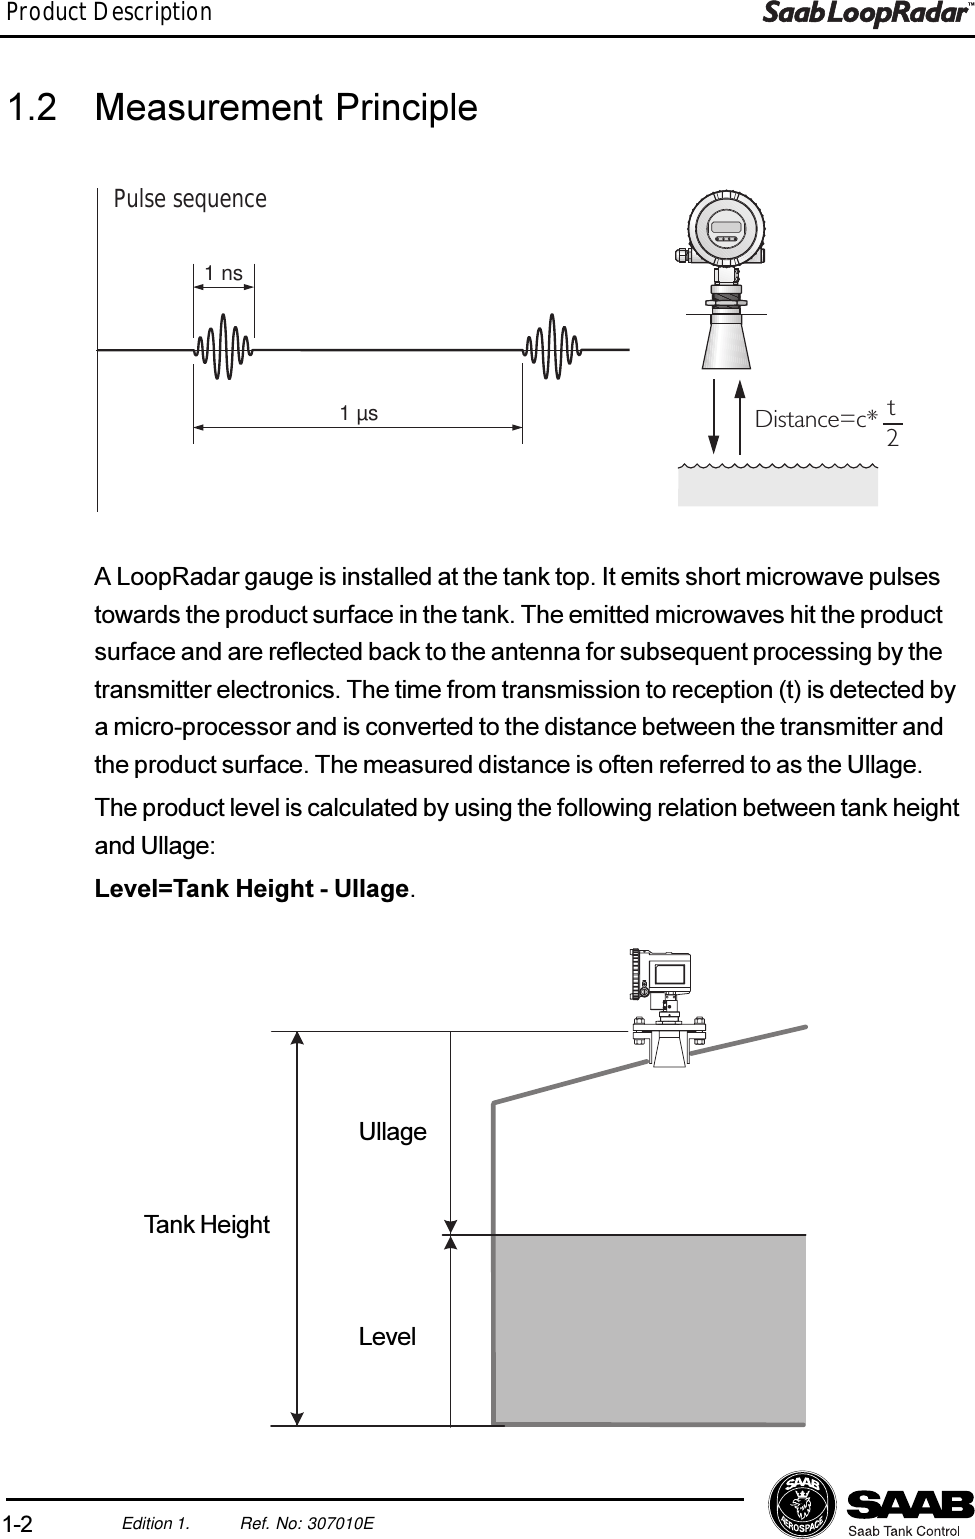 1-2Edition 1. Ref. No: 307010EProduct Description1.2 Measurement PrincipleUllageLevel1 ns1 µsPulse sequenceDistance=c* 2tA LoopRadar gauge is installed at the tank top. It emits short microwave pulsestowards the product surface in the tank. The emitted microwaves hit the productsurface and are reflected back to the antenna for subsequent processing by thetransmitter electronics. The time from transmission to reception (t) is detected bya micro-processor and is converted to the distance between the transmitter andthe product surface. The measured distance is often referred to as the Ullage.The product level is calculated by using the following relation between tank heightand Ullage:Level=Tank Height - Ullage.Tank Height